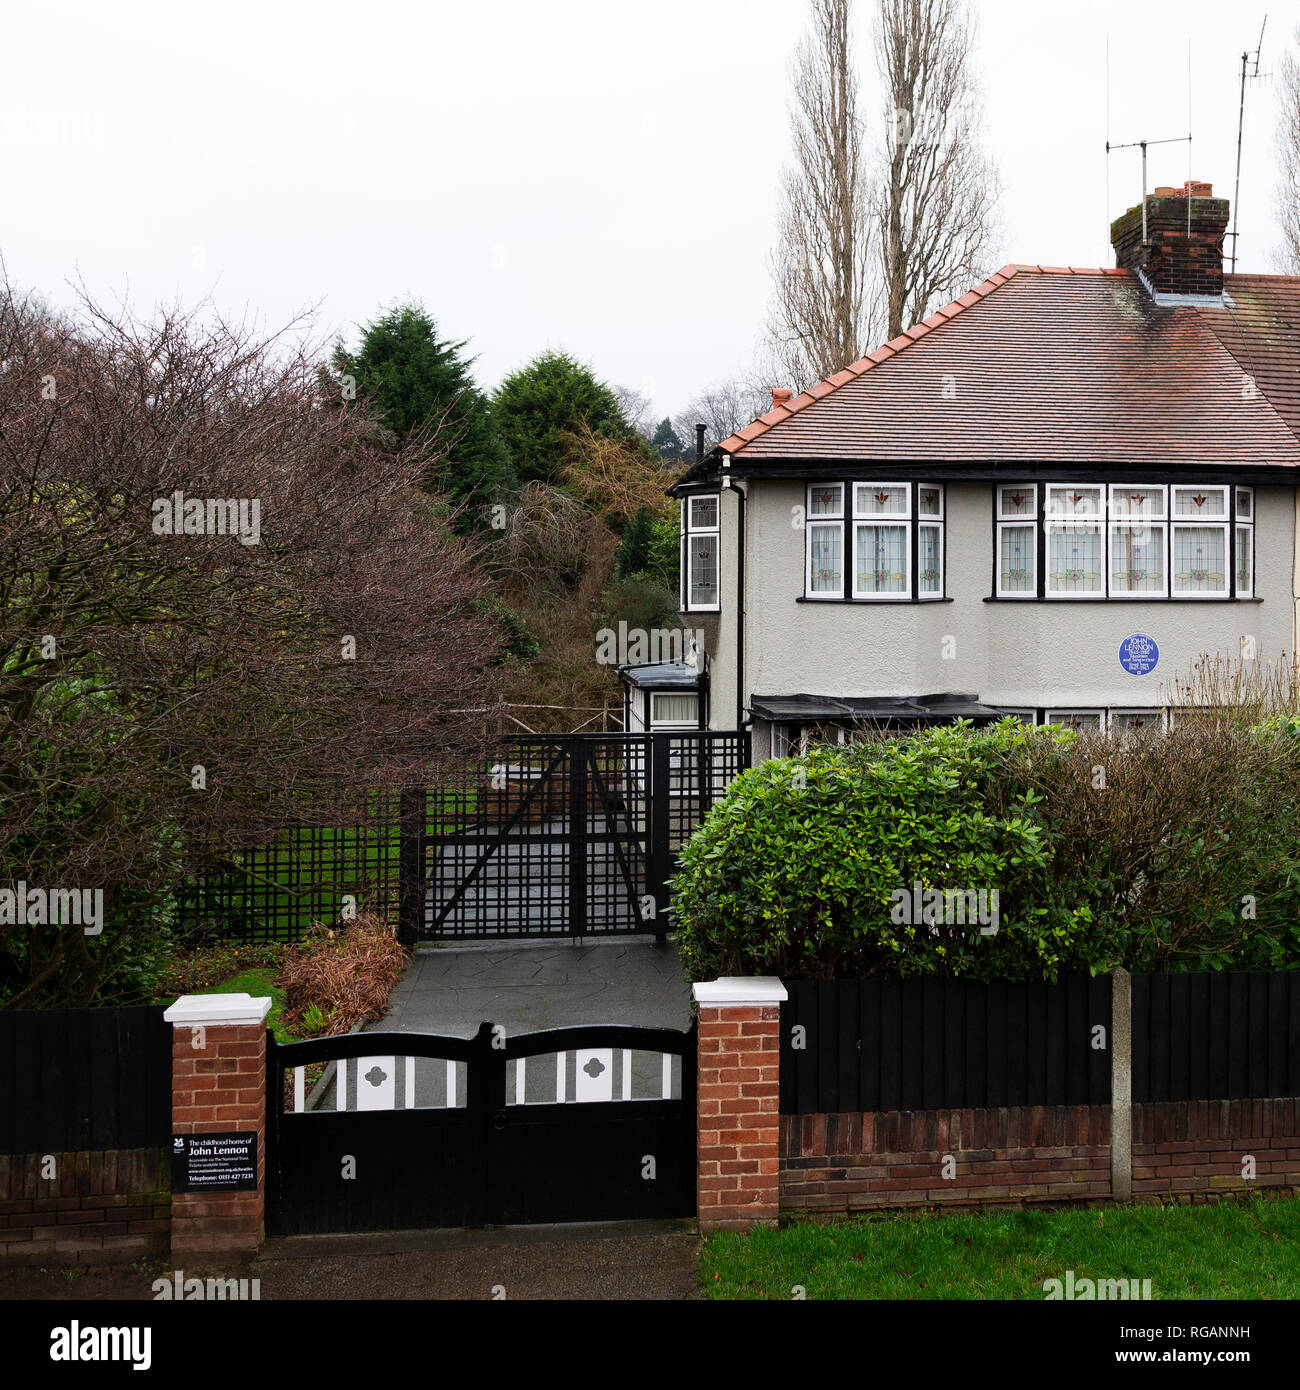 John Lennon's Childhood Home at 251 Menlove Avenue in Liverpool, England. The building is known as Mendips. Stock Photo